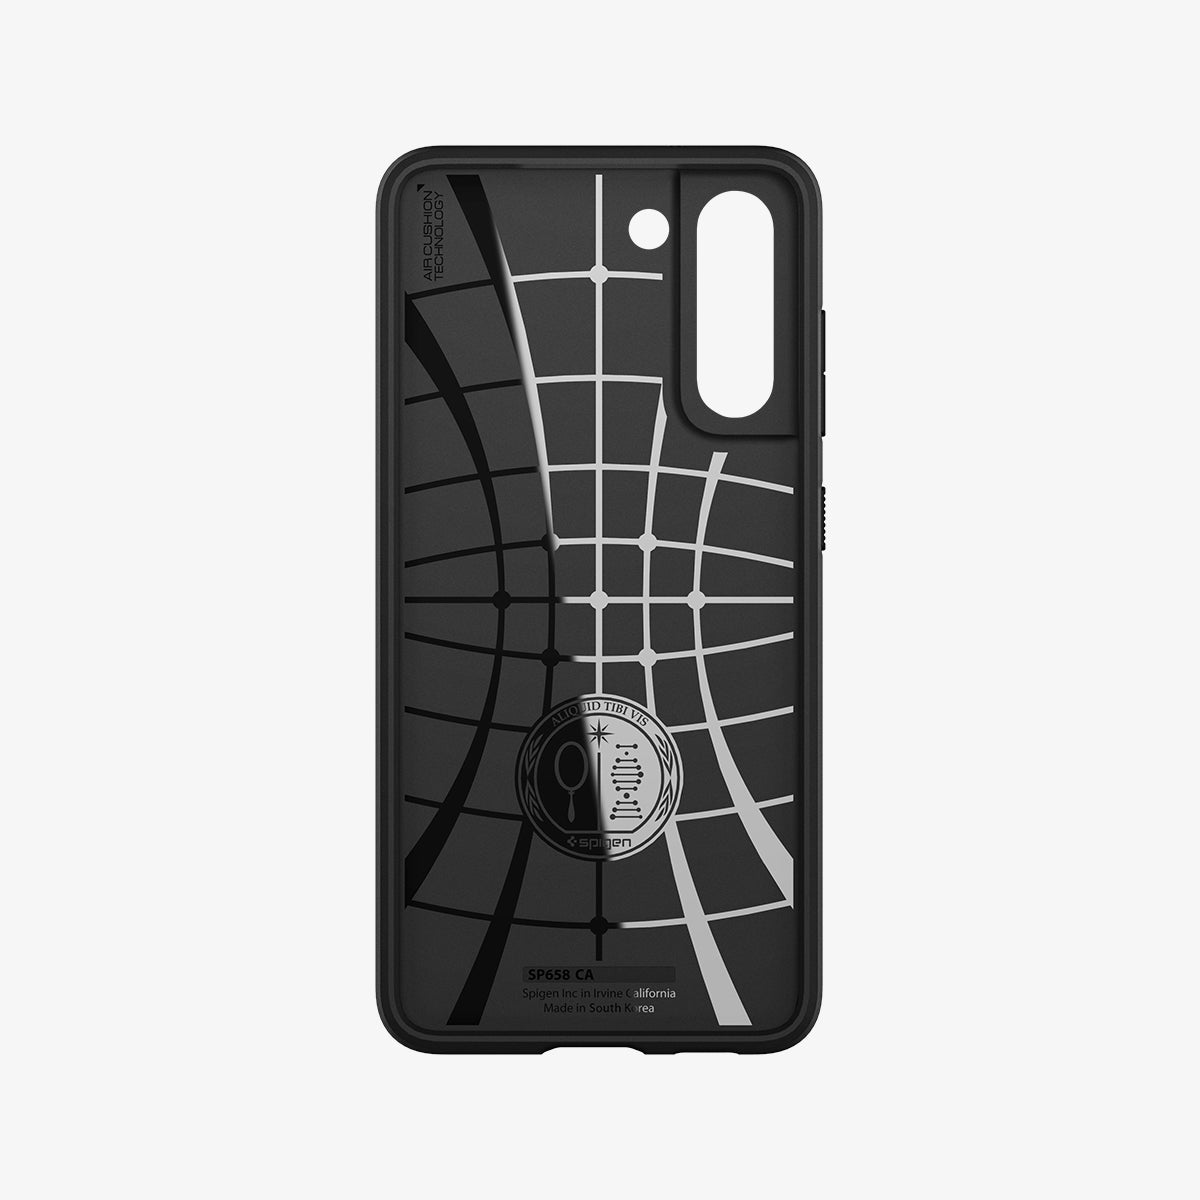 ACS03058 - Galaxy S21 FE Case Core Armor in Matte Black showing the inner case with spider web pattern